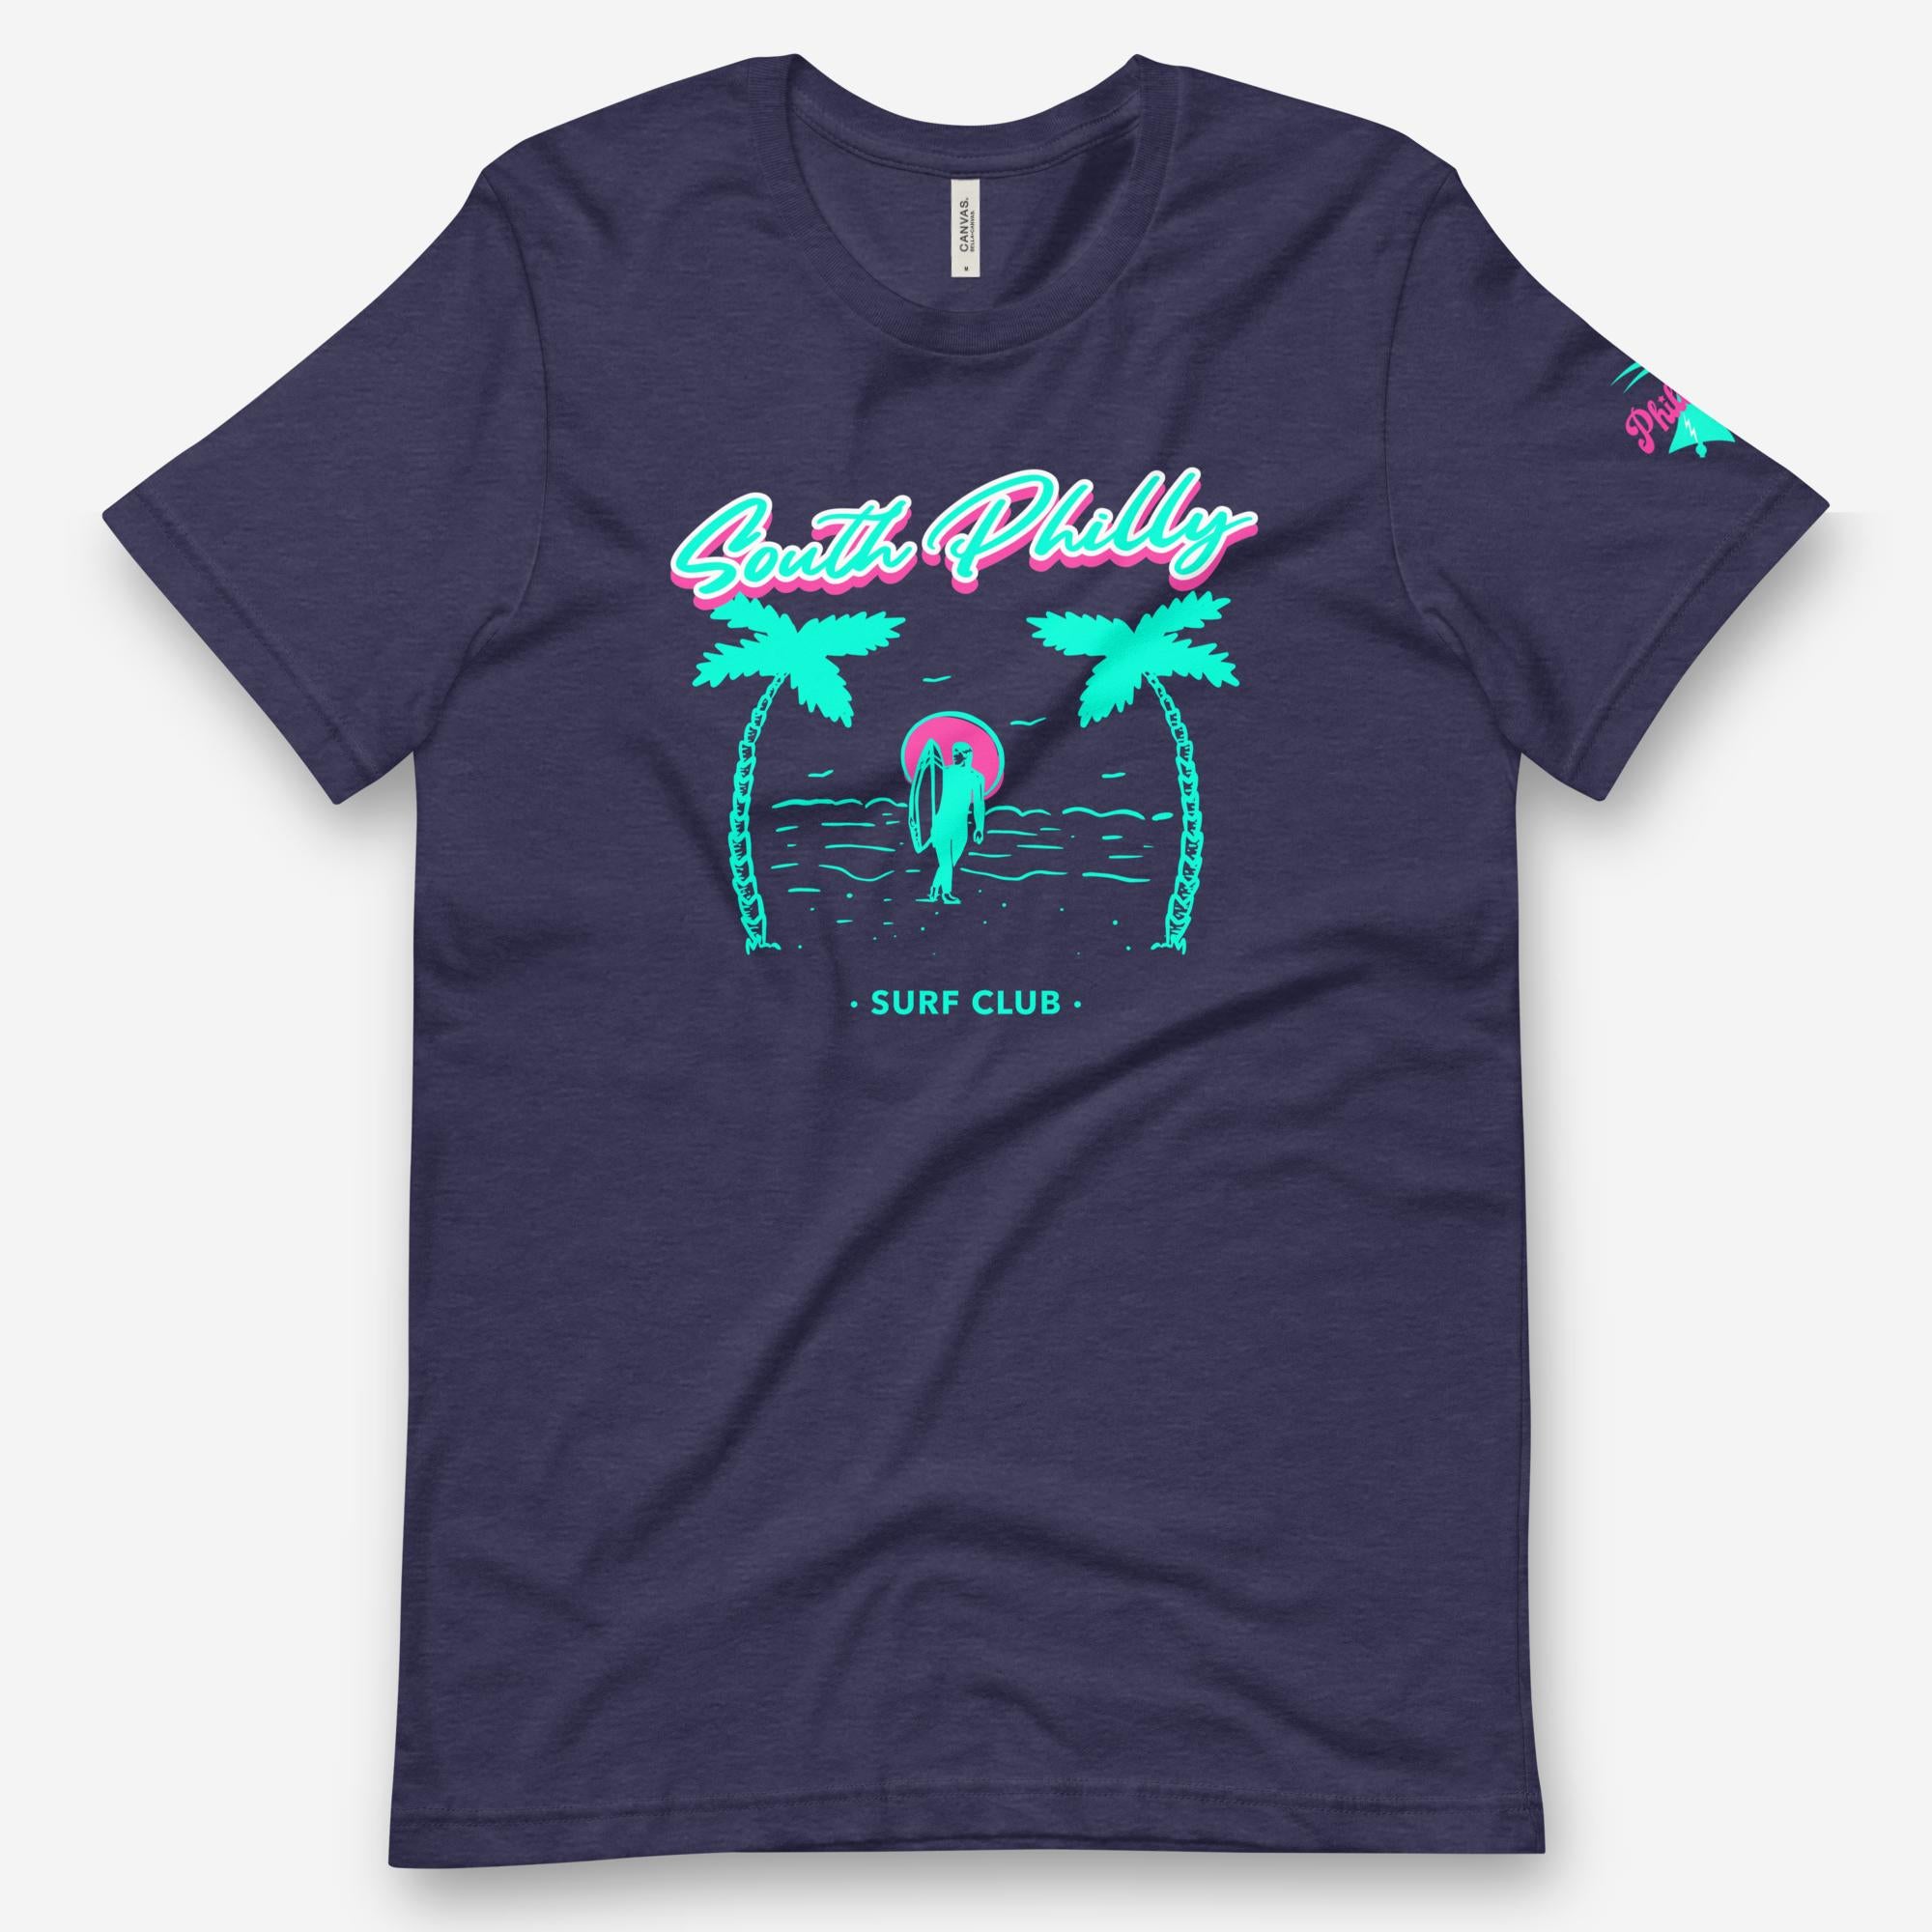 "South Philly Surf Club" Tee